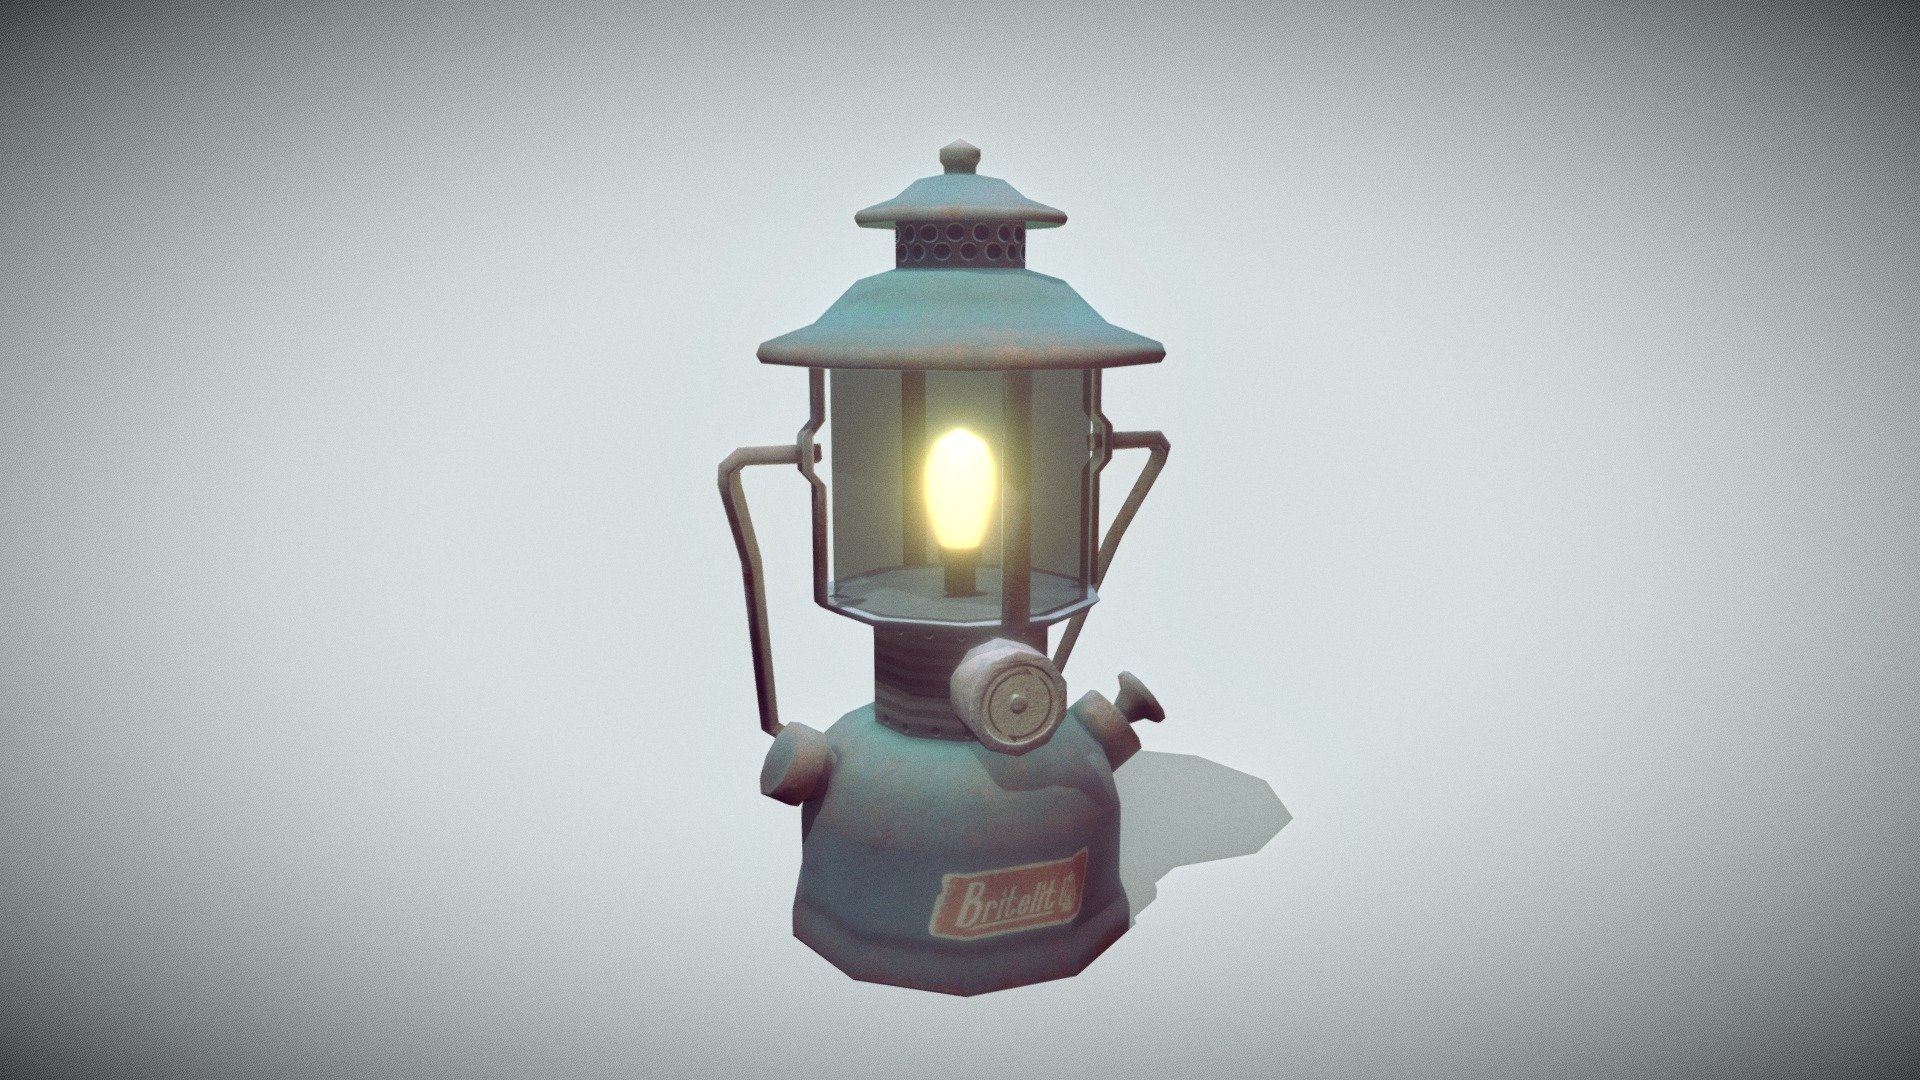 Just another old lantern for all of your old lantern needs. Everyone from young little boy scouts on a camping trip to tough old mountain men in the harshest wilderness needs their little sunshine of the night. If you want, you can buy this prop and many more coming soon on unity asset store. Check out Team XS.

Technical stuff:

⁍ Modelled using real-life dimensions in Blender 2.79

⁍ Separate handle with a pivot-point in the middle

⁍ Low-poly and lightweight

⁍ Optimized UV maps

⁍ PBR 2048x2048 .png textures

⁍ Perfect as a prop or handheld item in well optimized games - Gasoline Lantern - Buy Royalty Free 3D model by R3indeer 3d model